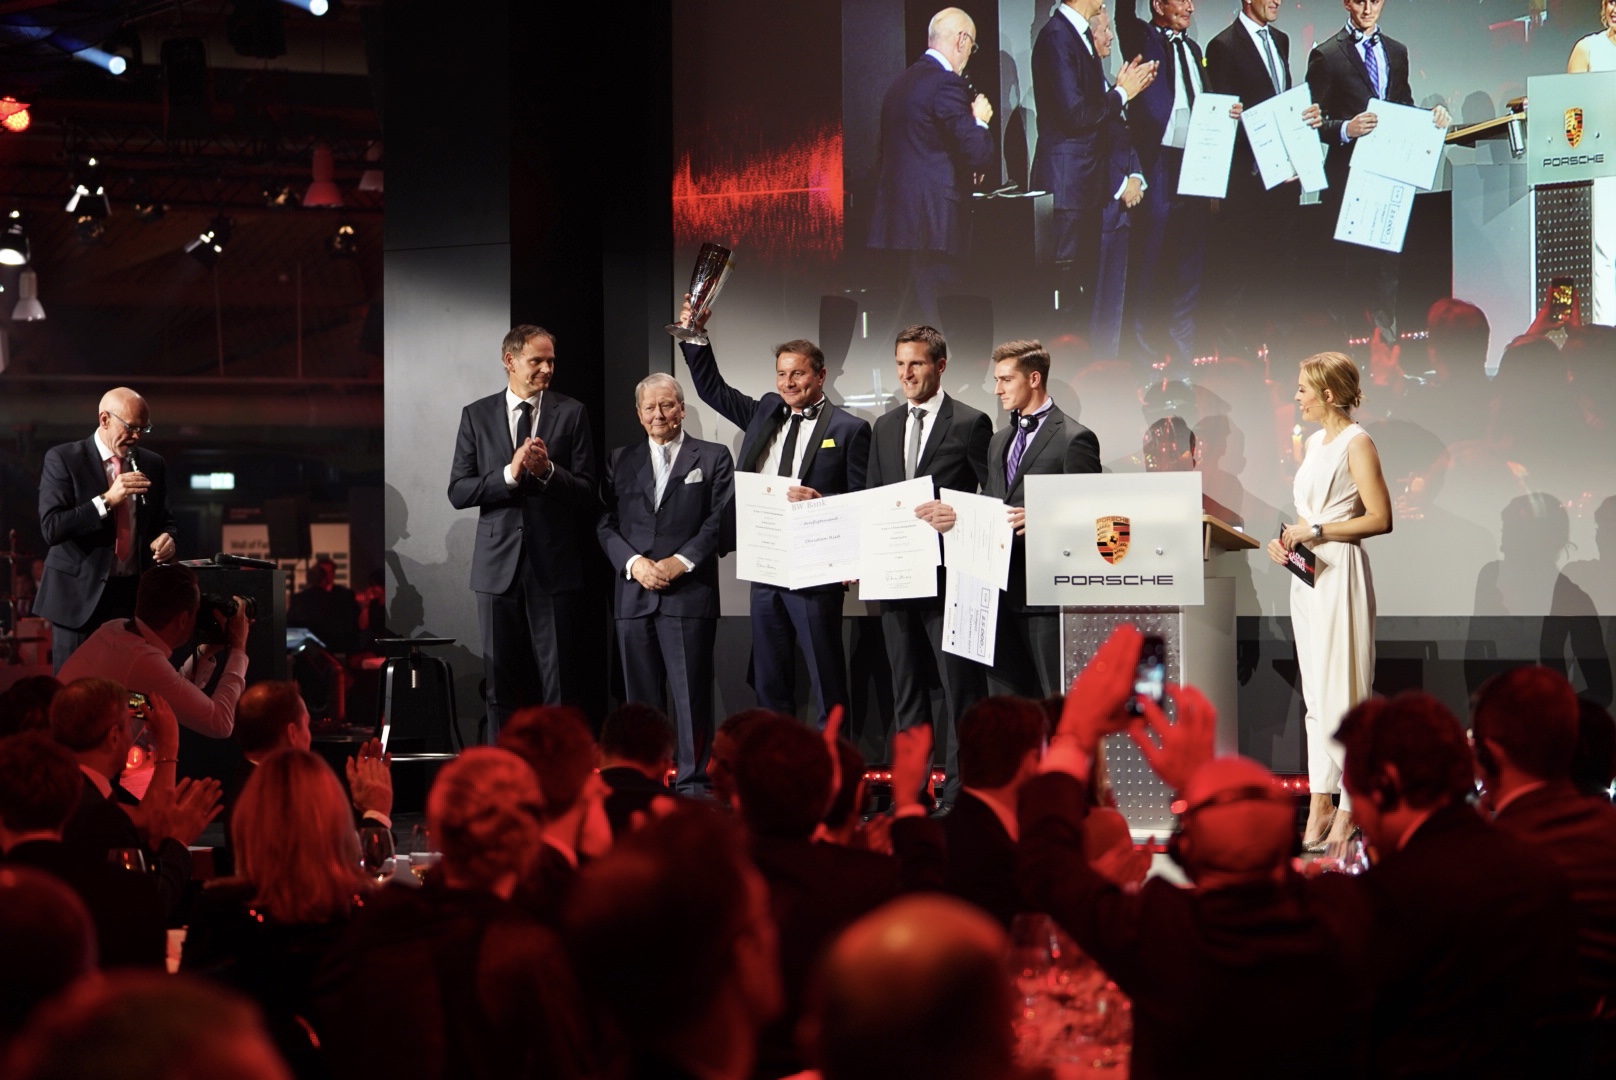 Porsche Cup price giving: Oliver Blume, Chairman of the Executive Board at Porsche AG, Dr. Wolfgang Porsche, Alan Brynjolfsson (USA), Christian Ried (D), Trent Hindman (USA), l-r, Porsche Night of Champions, 2019, PCNA